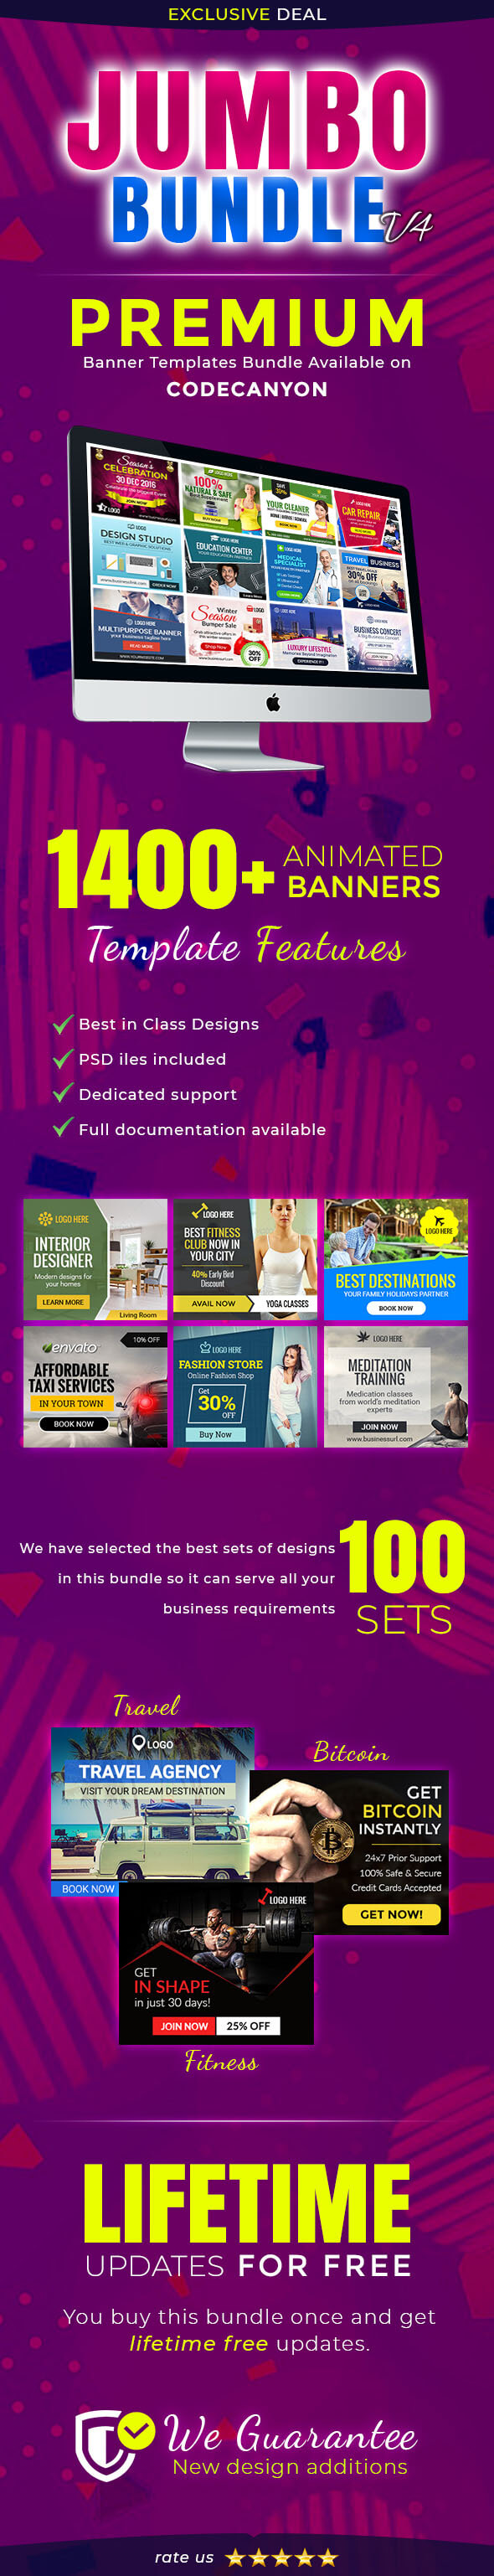 Jumbo Bundle V21 - 12100+ Animated HTML21 Ad Banners in Google Web For Animated Banner Templates